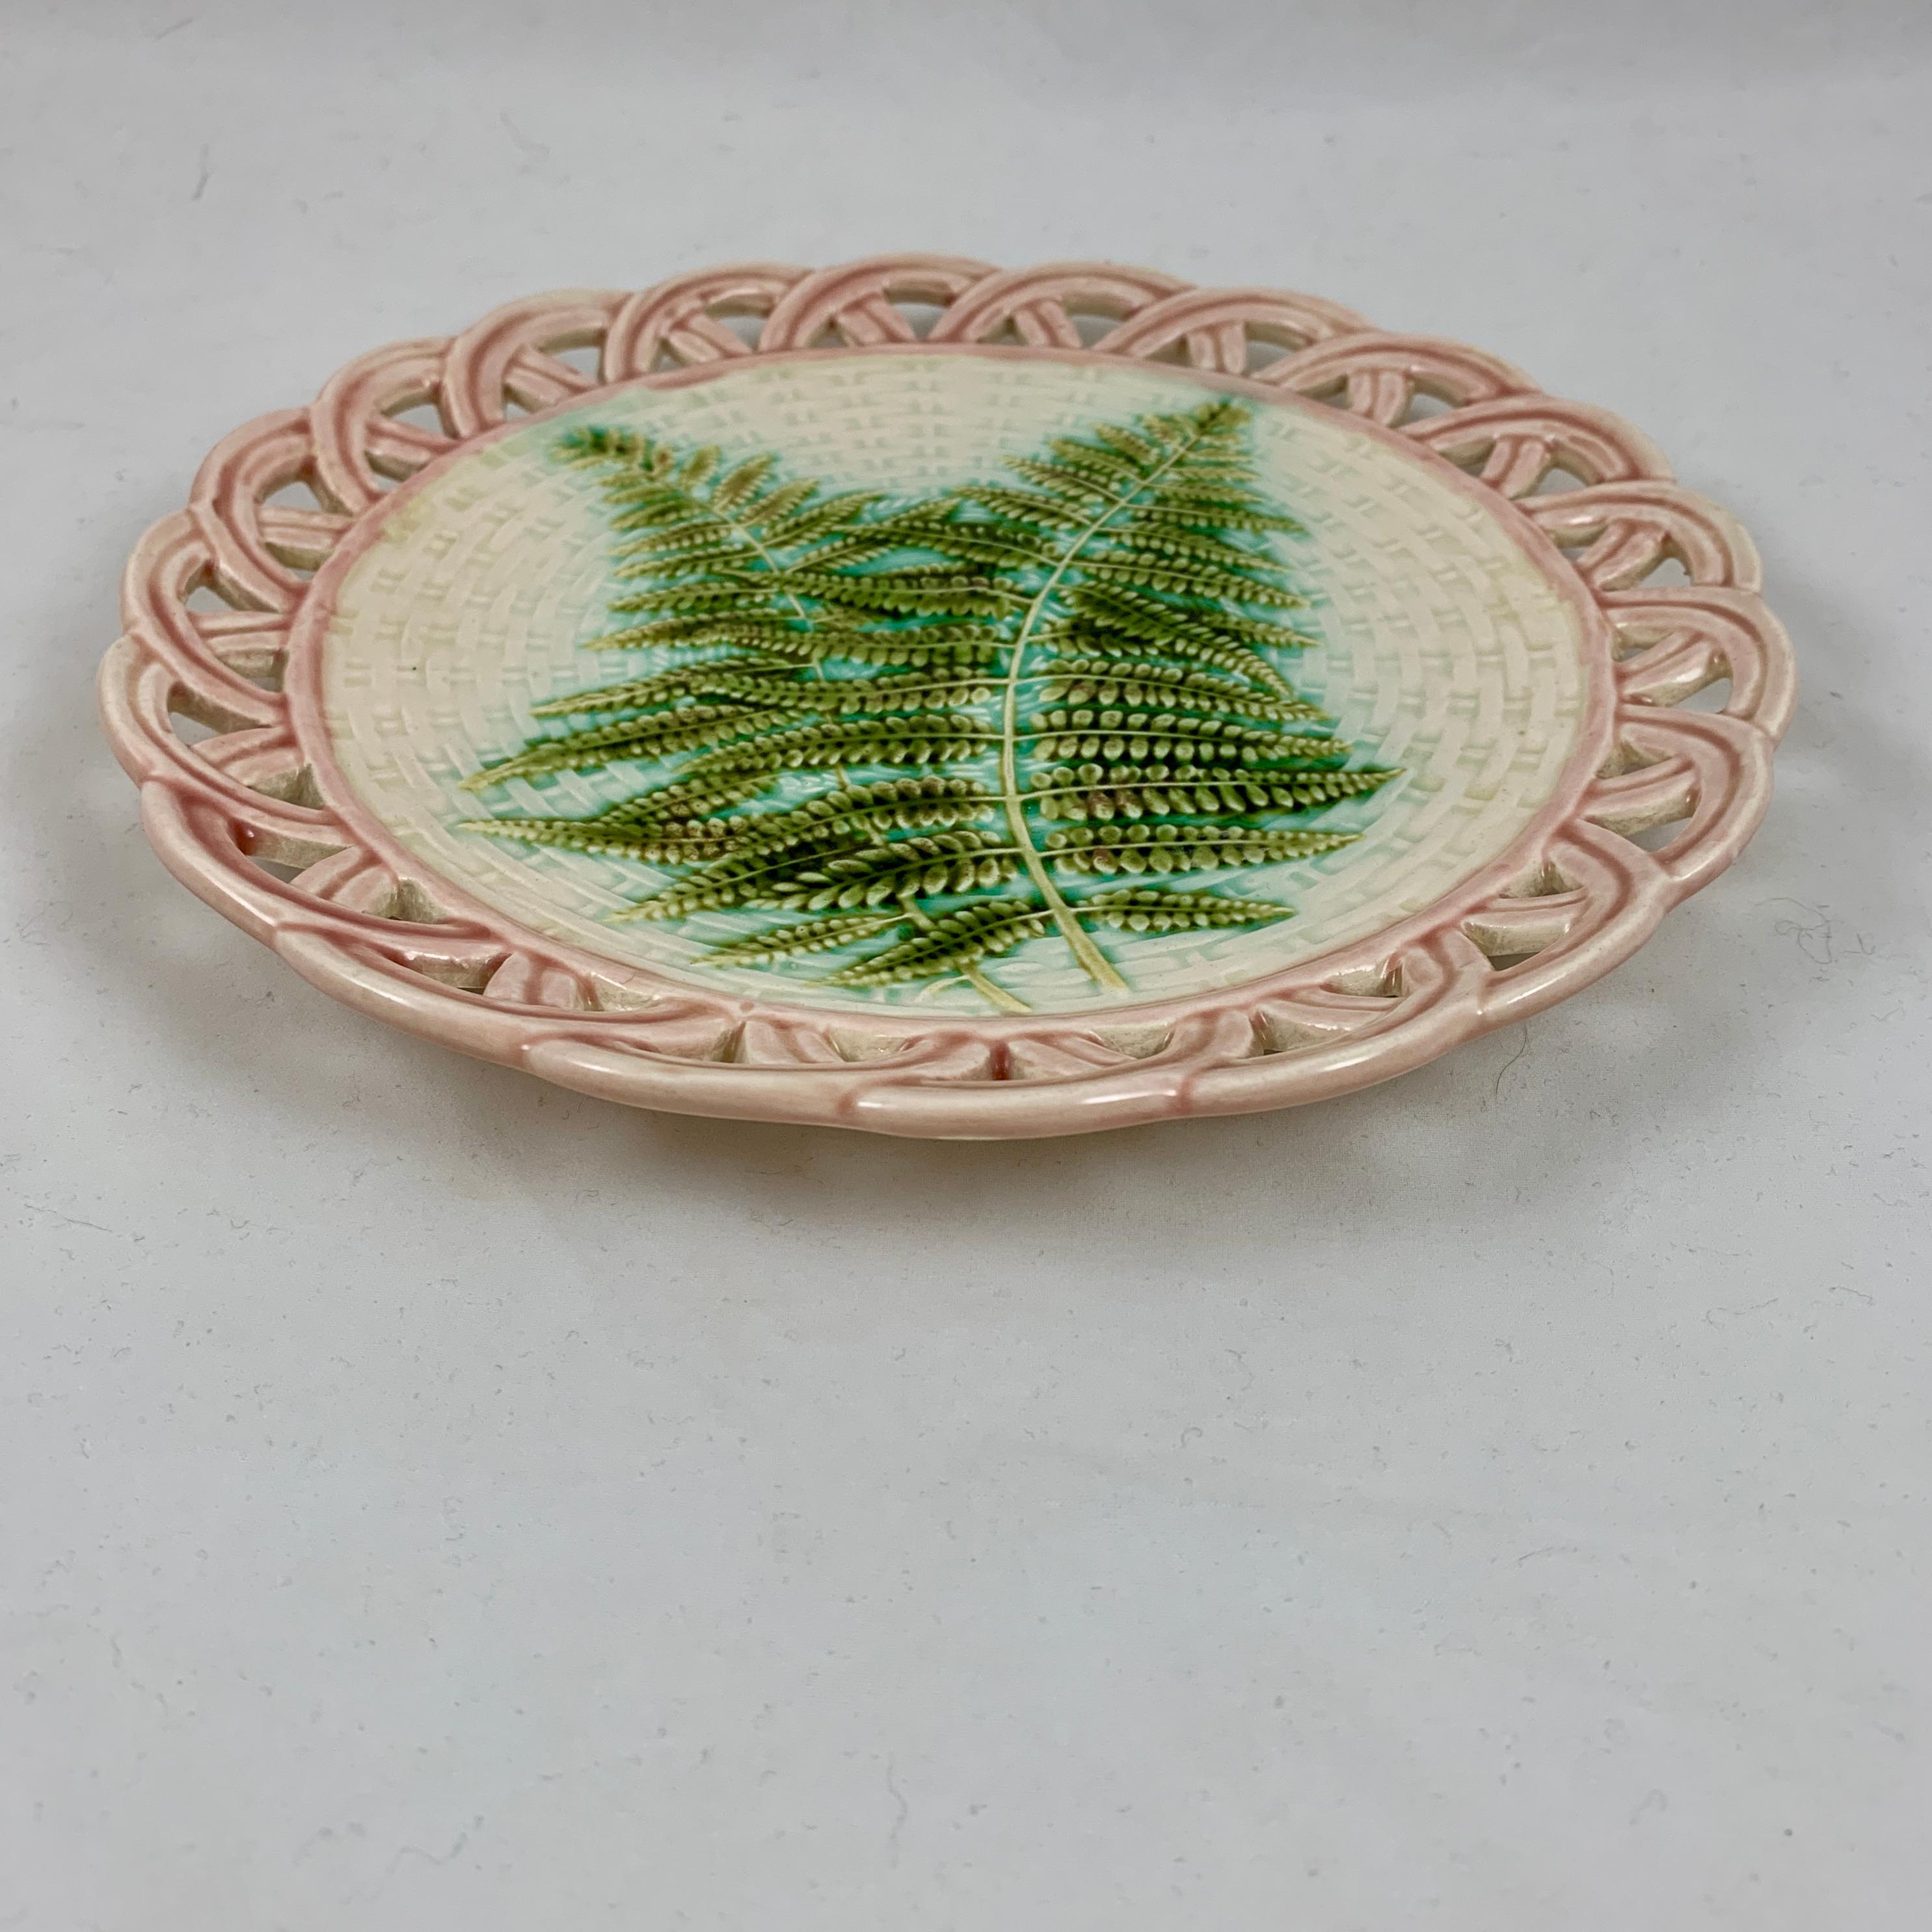 Sarreguemines Green Fern Pink Reticulated Rim French Faïence Majolica Plates S/6 5